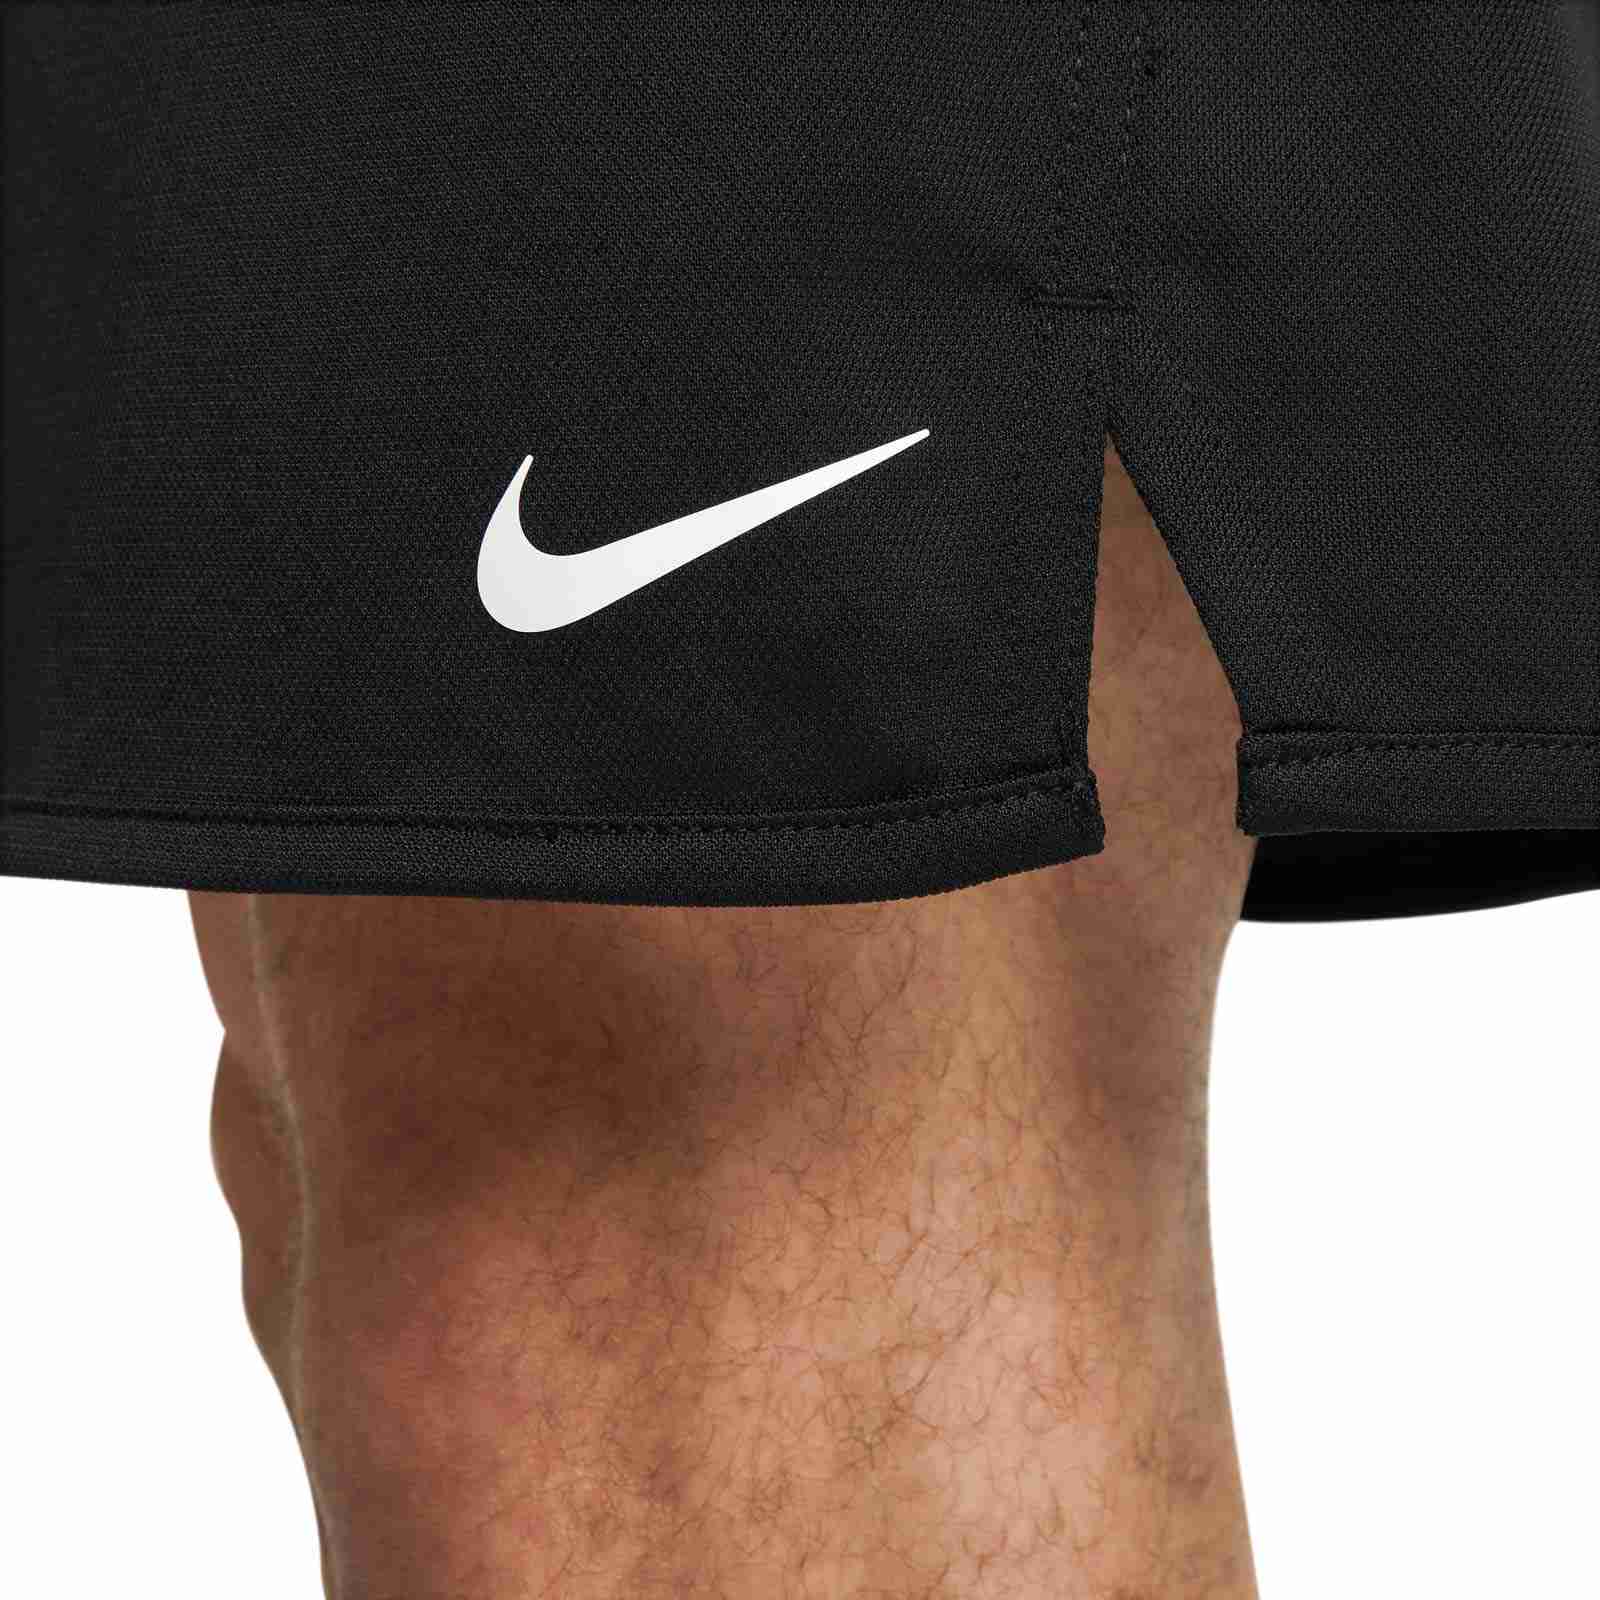 NIKE DRI-FIT TOTALITY MENS 7" UNLINED KNIT SHORTS